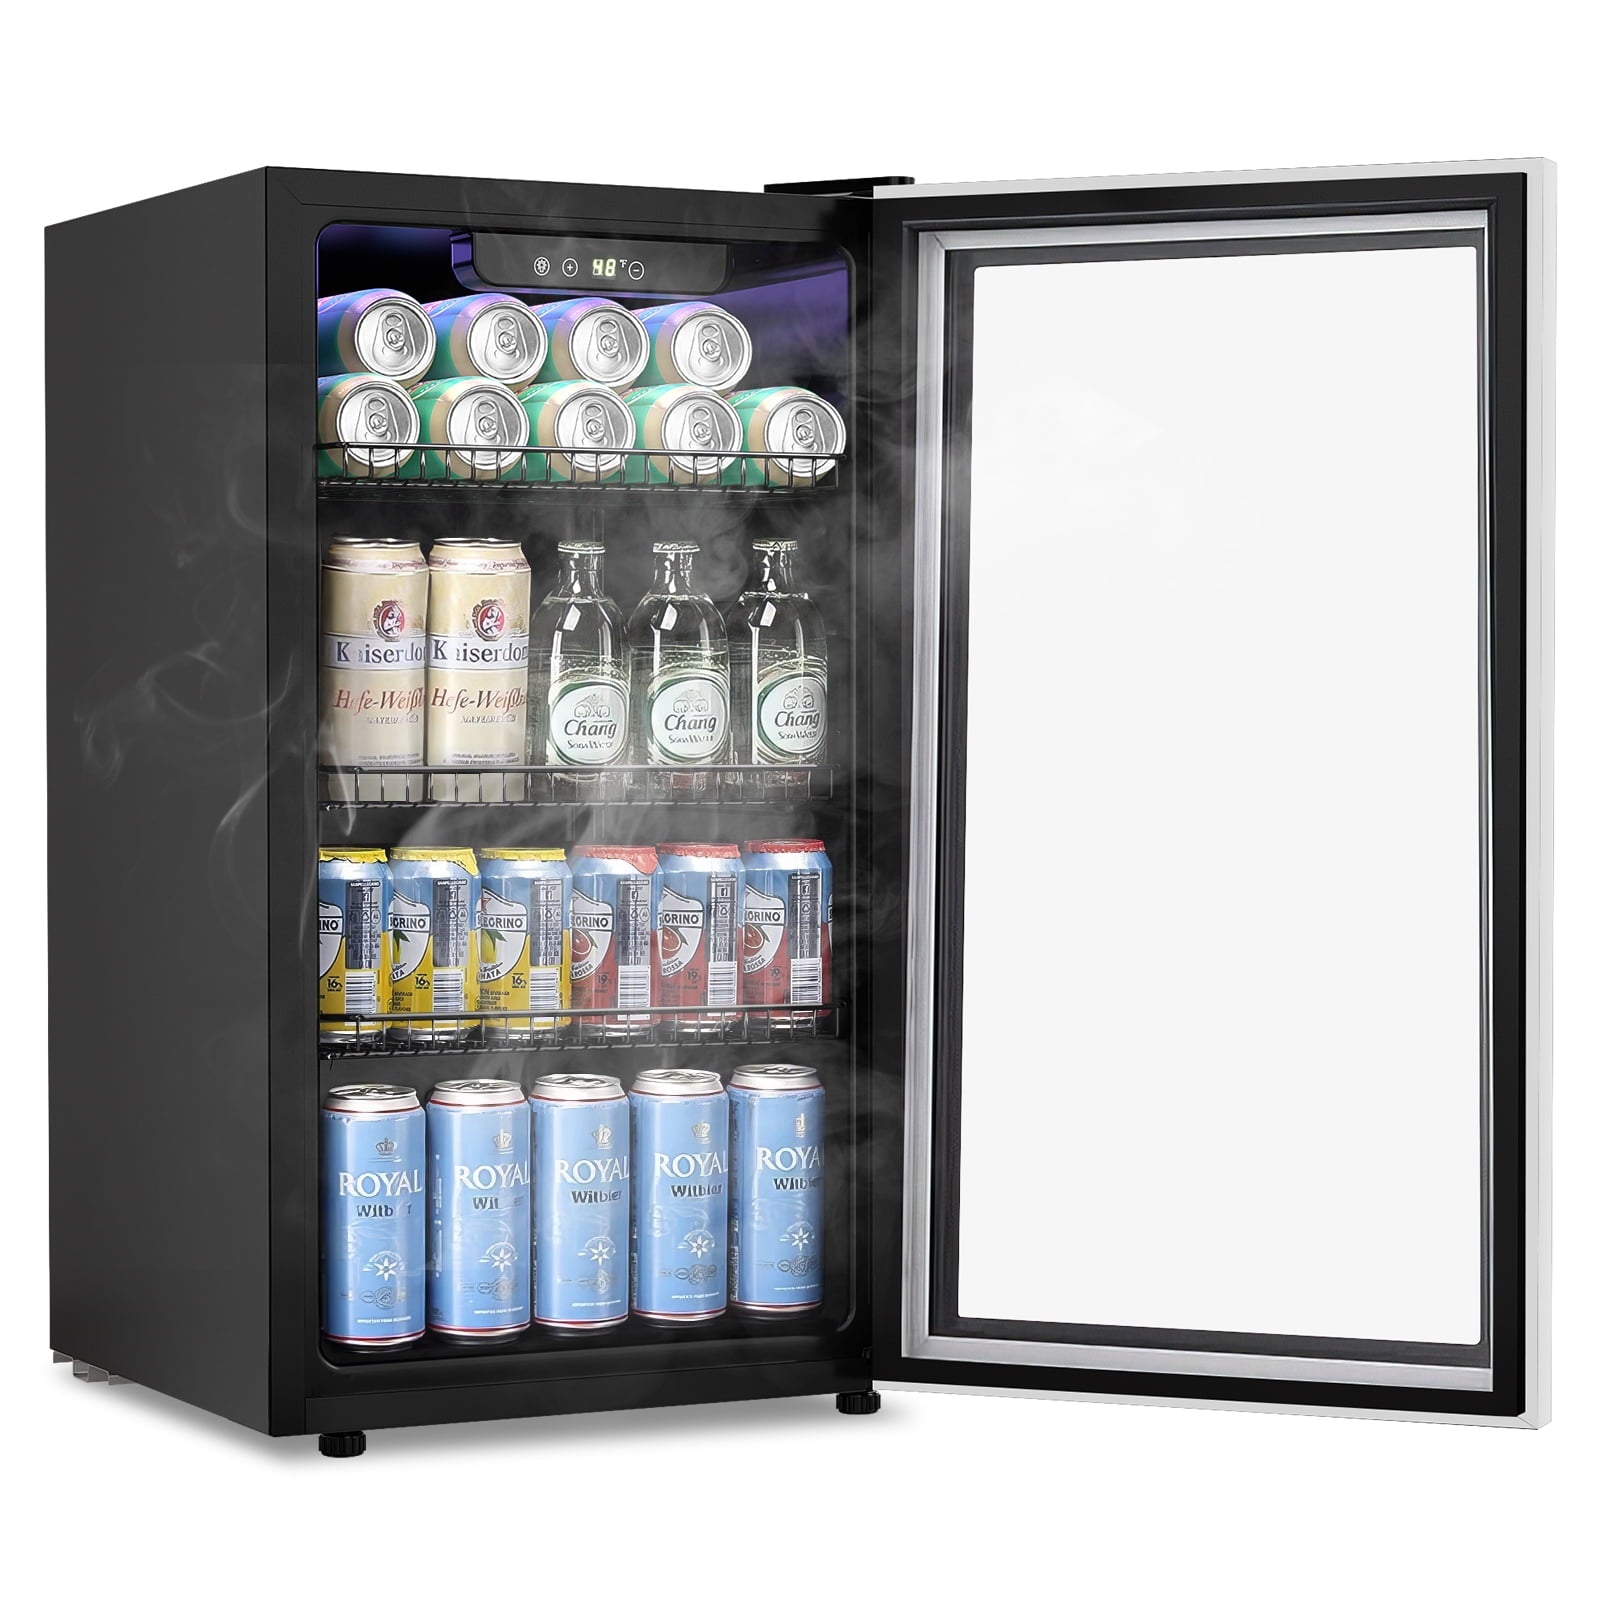 Auseo 3.2 Cu.ft Beverage Refrigerator Cooler -120 Can Mini Fridge with Glass Door, Small Refrigerator with Adjustable Shelves for Soda Beer or Wine, Perfect for Home/Bar/Office